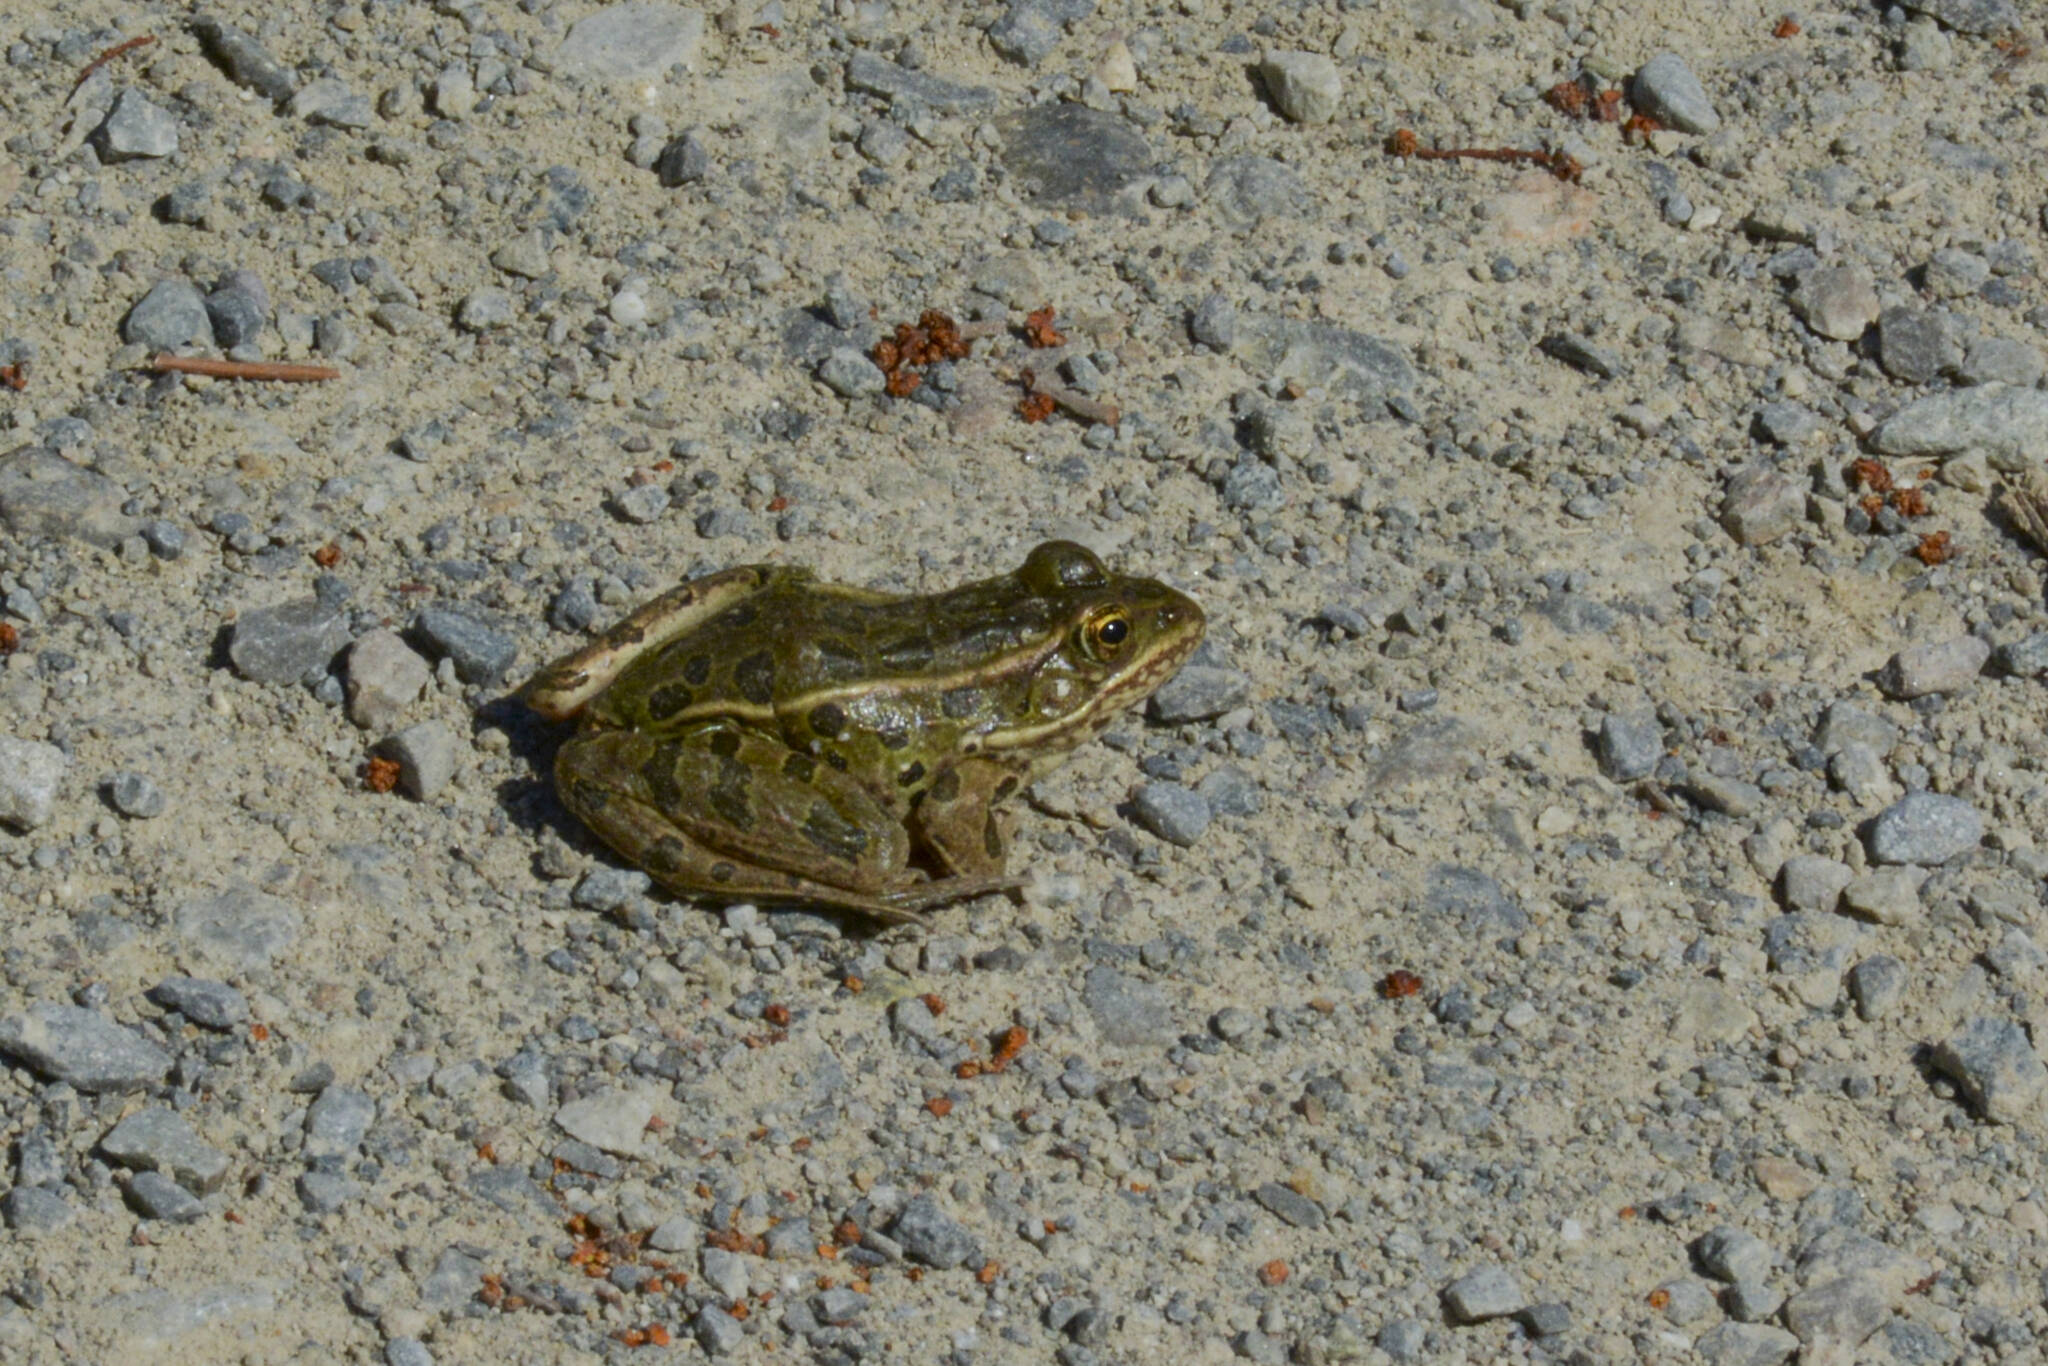 A northern leopard frog was seen hopping along at Duck Lake during spring migration. (Photo by Kelsey Yates)